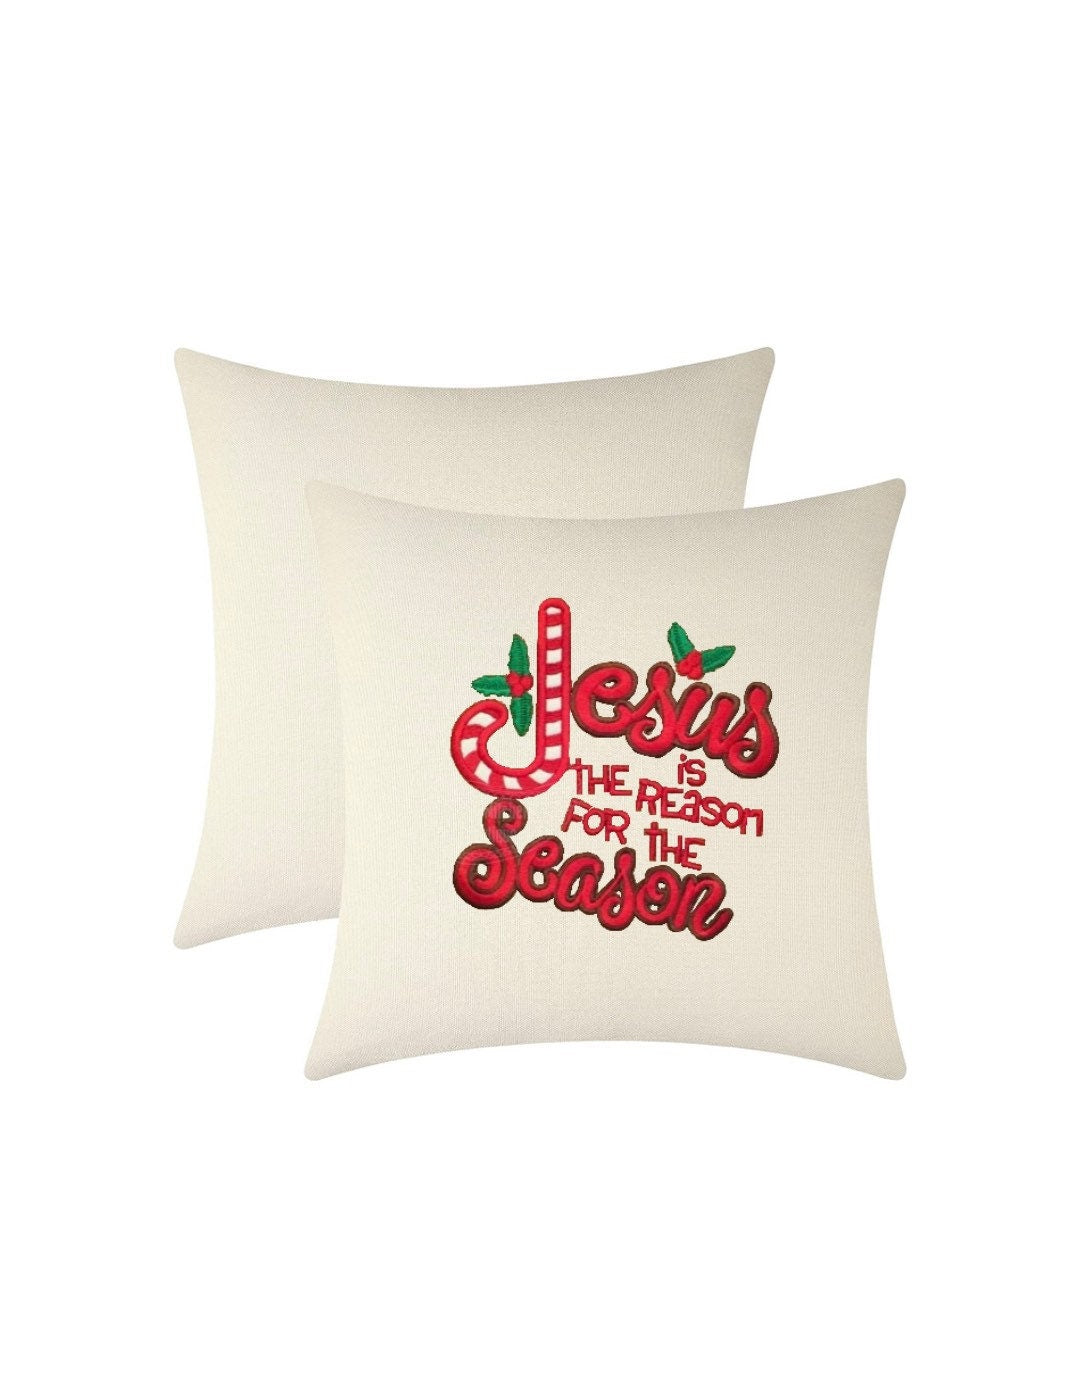 Christmas “Jesus is the Reason for the Season”  Embroidered Throw Pillow Cover. Cotton or Velvet decorative pillow cover